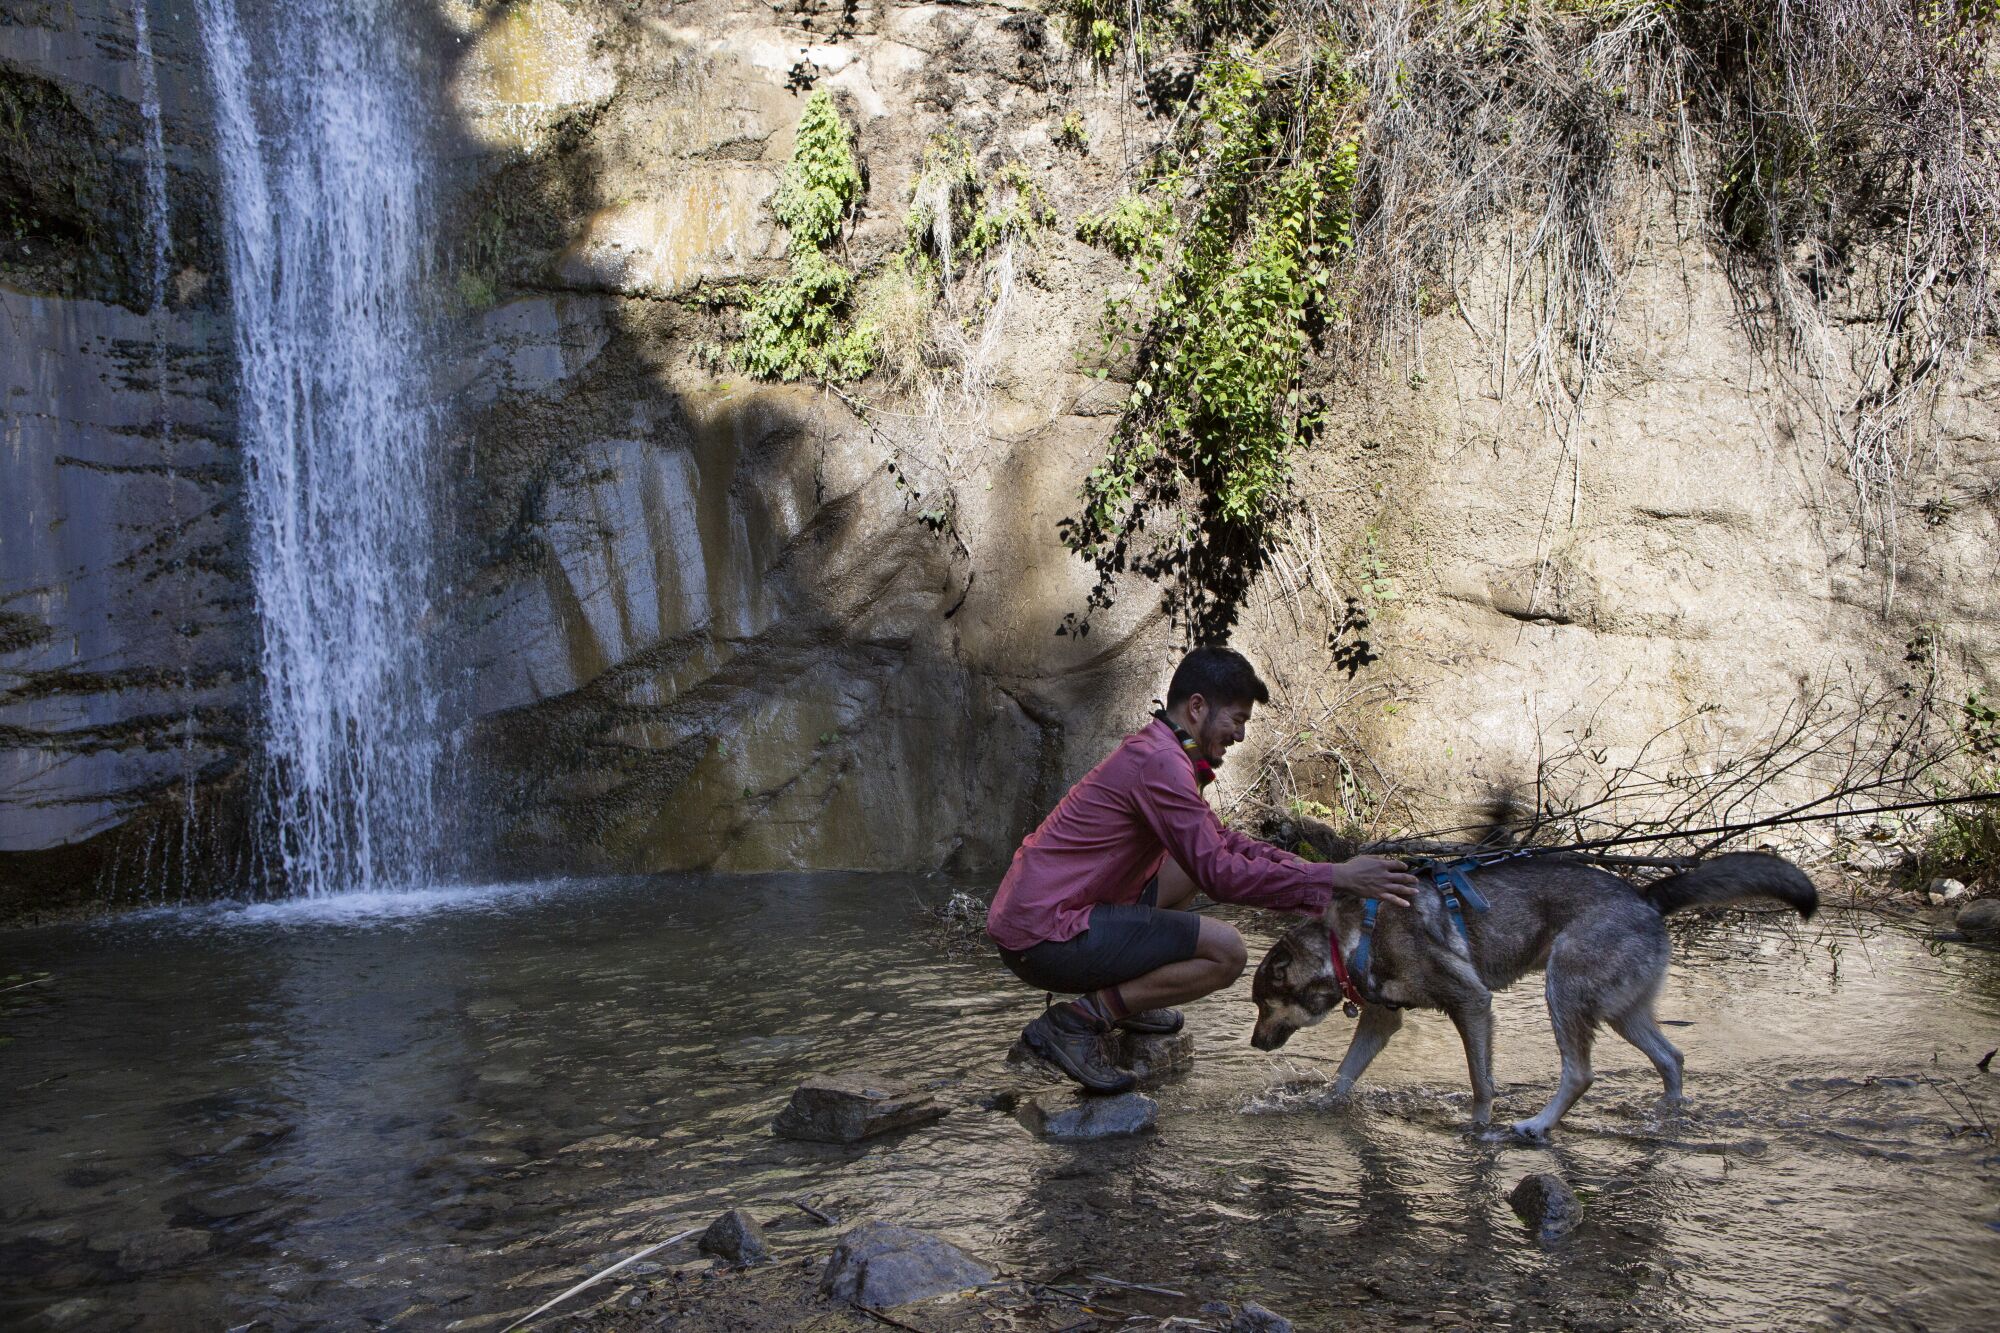 Near a waterfall and a rock wall, a man kneels on rocks in shallow water with his dog.